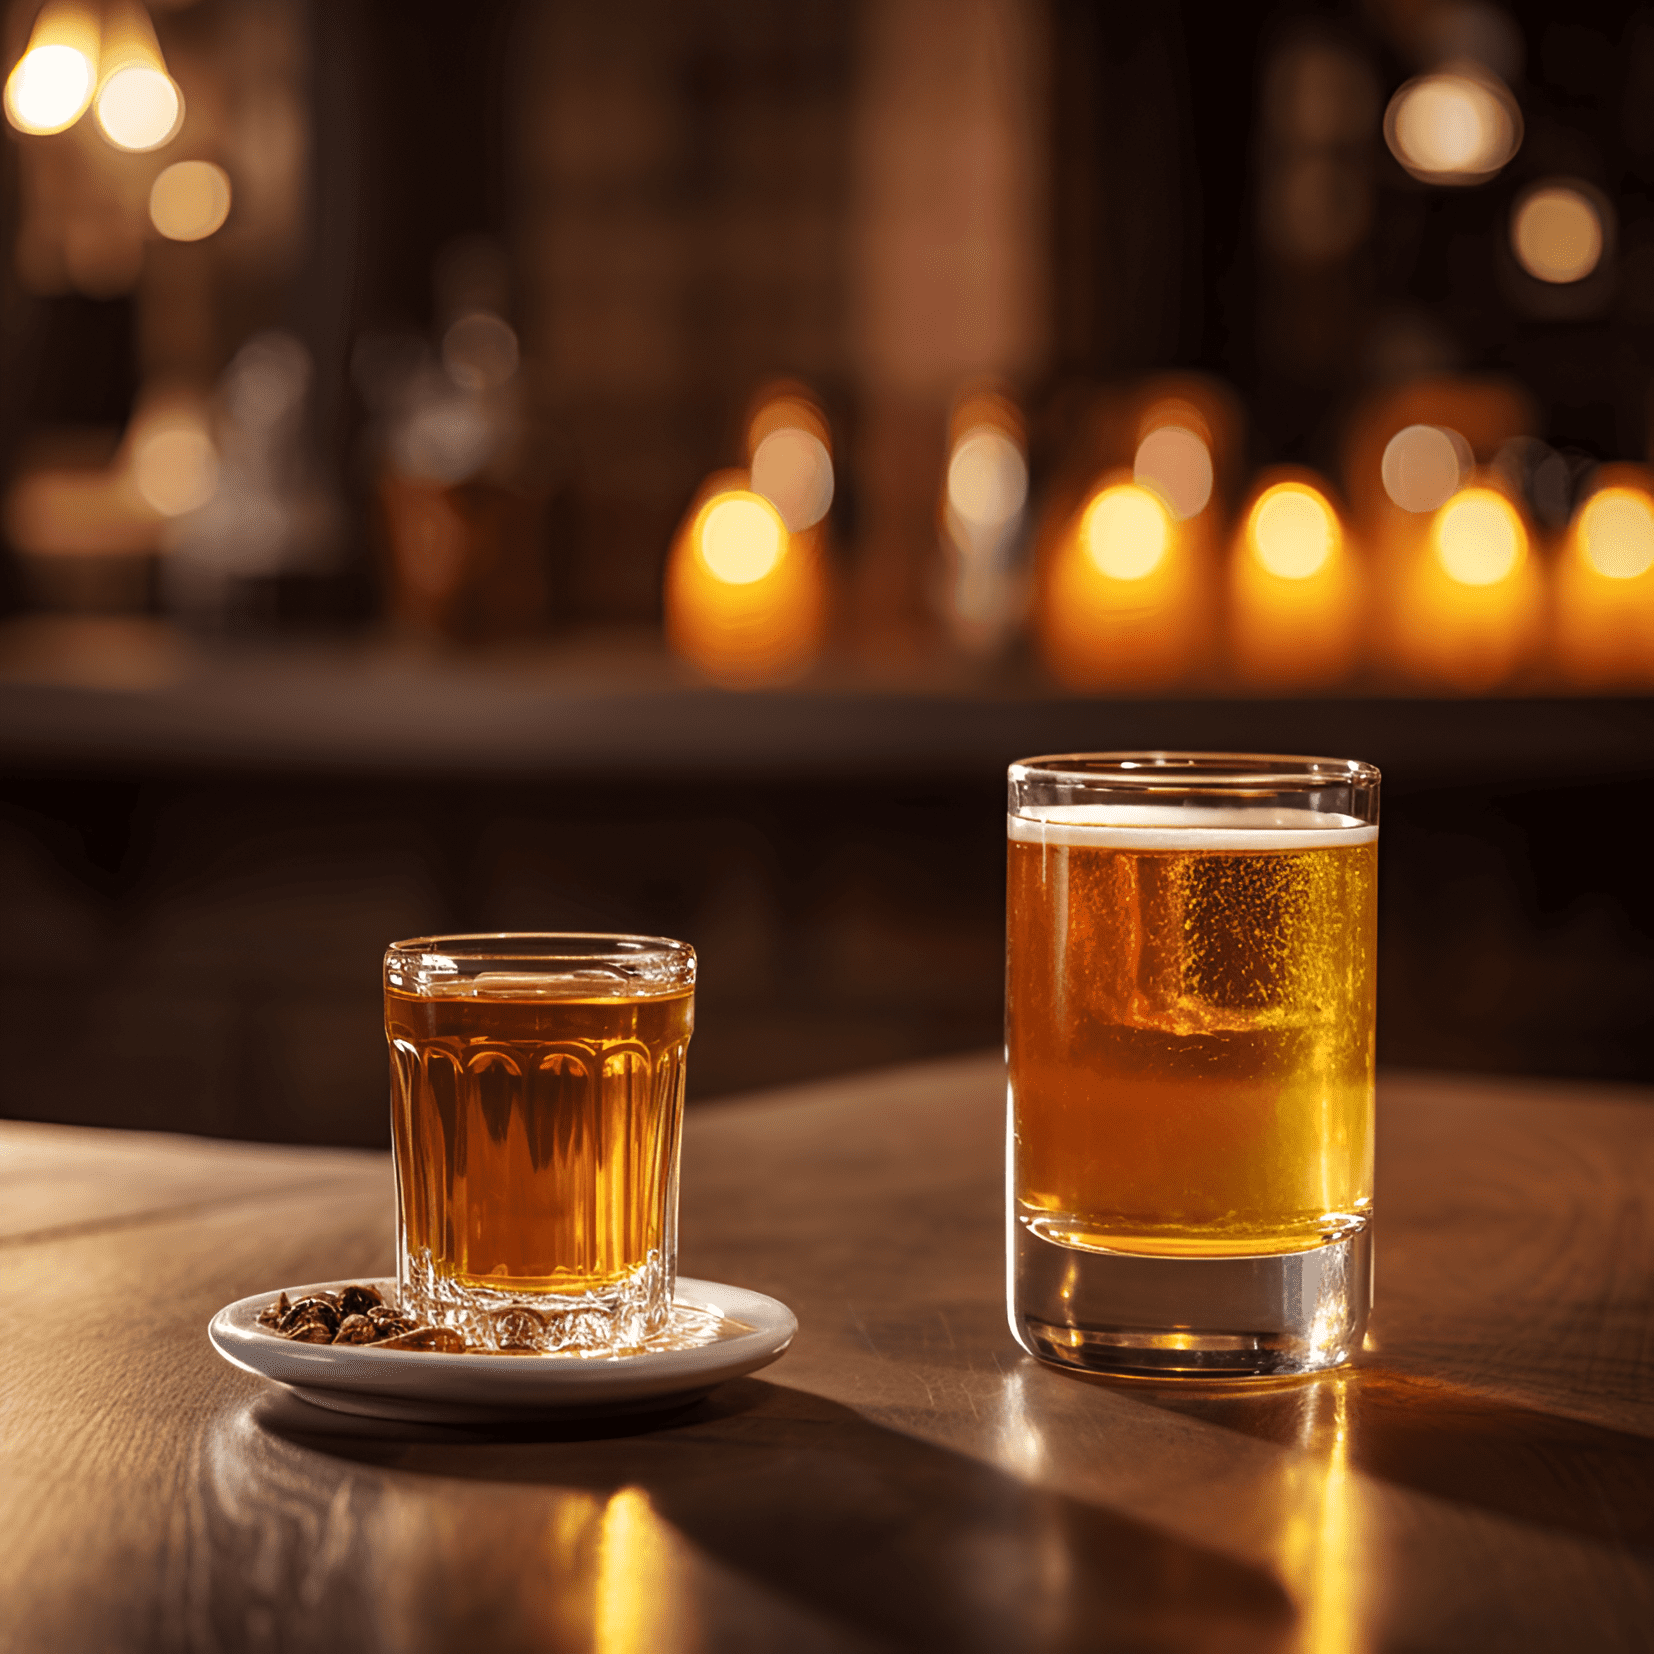 The Boilermaker is a strong, robust, and slightly bitter cocktail. The combination of whiskey and beer creates a bold and warming flavor, with the whiskey providing a smooth, rich taste and the beer adding a refreshing, slightly bitter note.